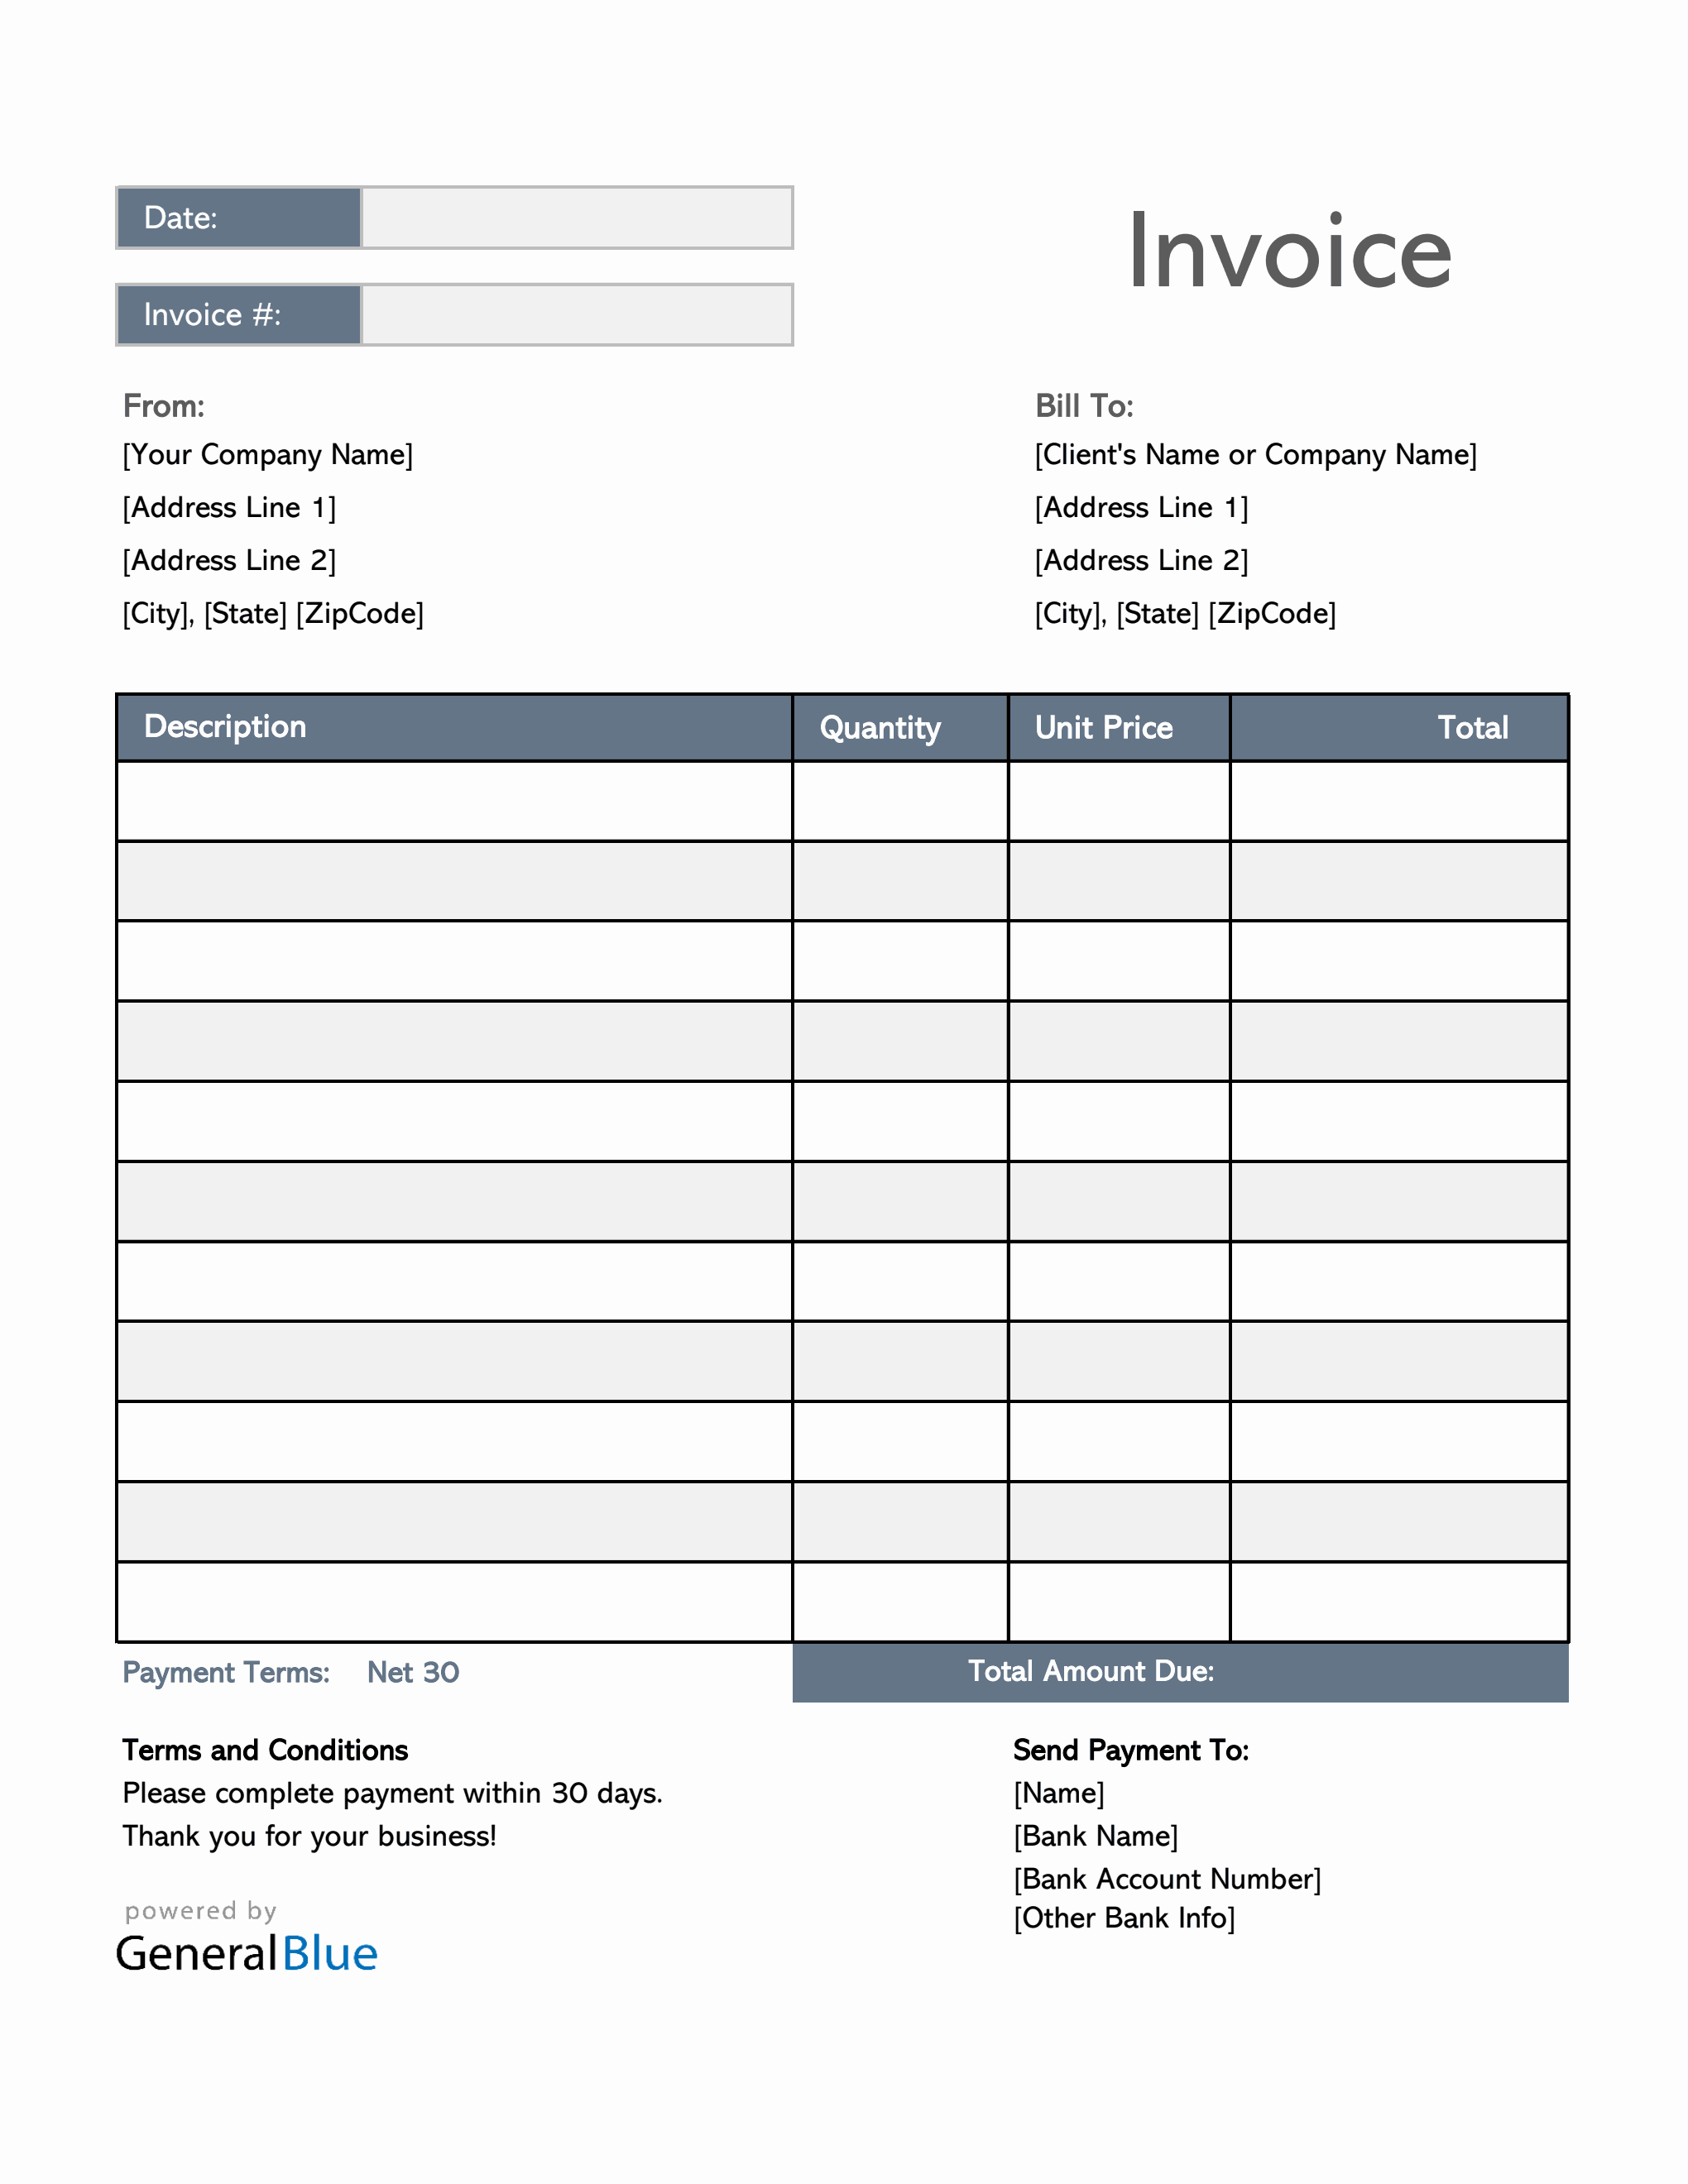 U.S. Invoice Template in Excel (Simple)